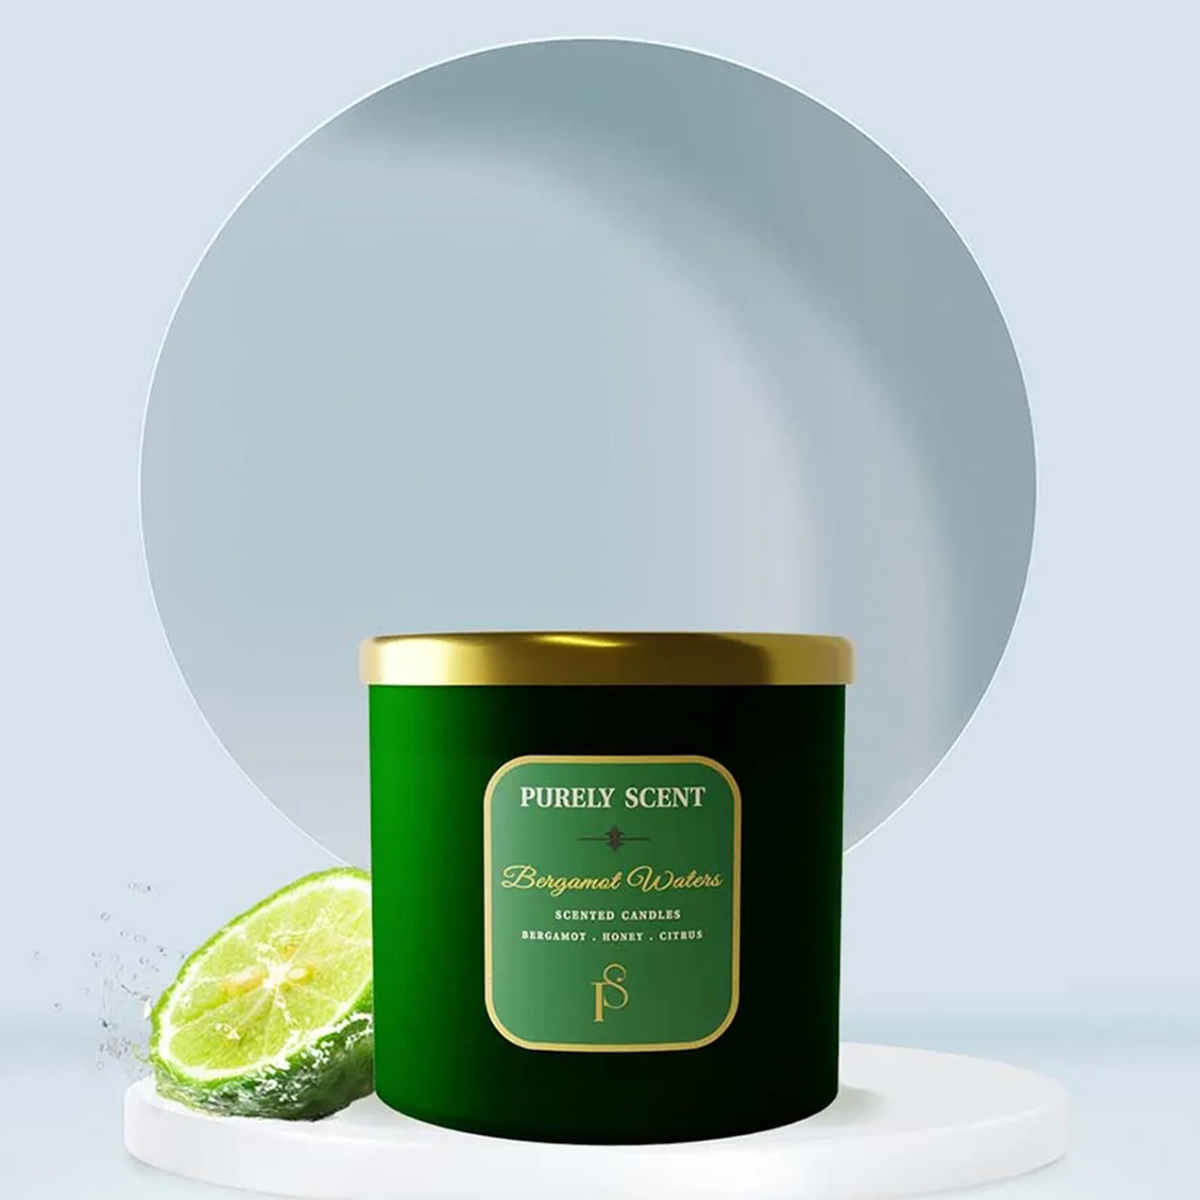 Purely Scent Bergamot Waters 100% Soy Wax Scented Jar Candle